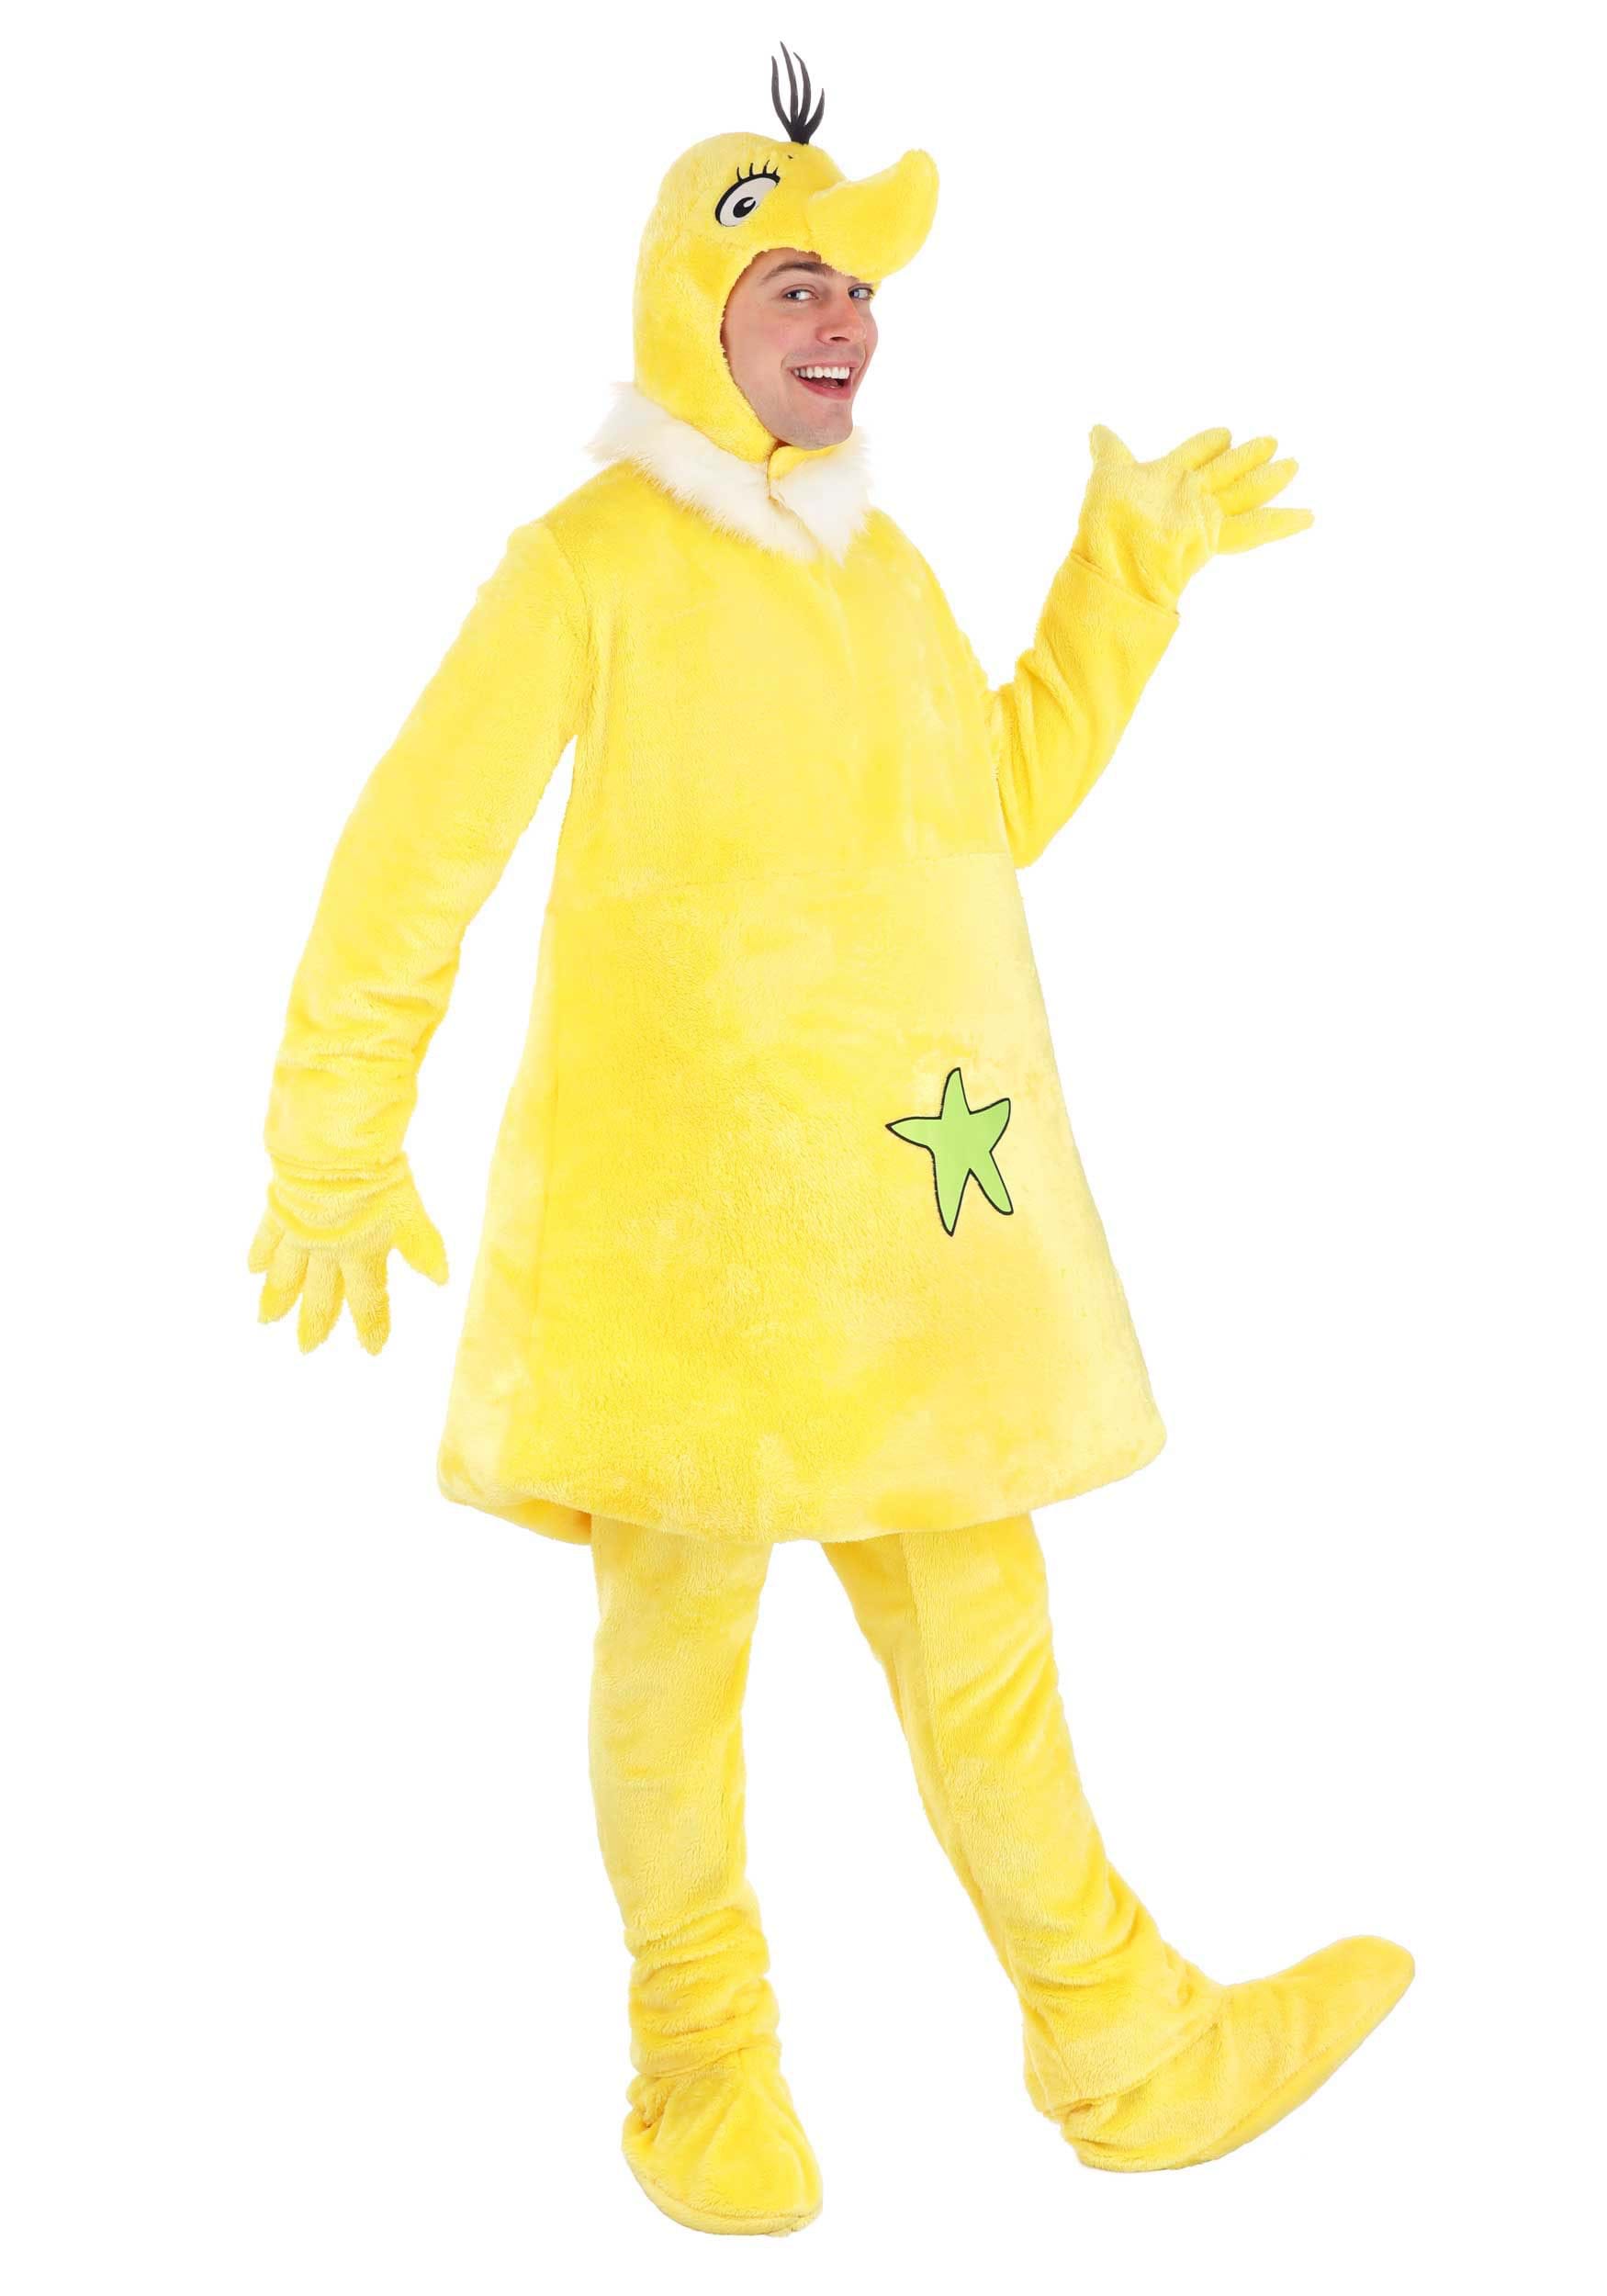 Image of Dr Seuss Star Bellied Sneetch Costume for Adults ID EL453112AD-S